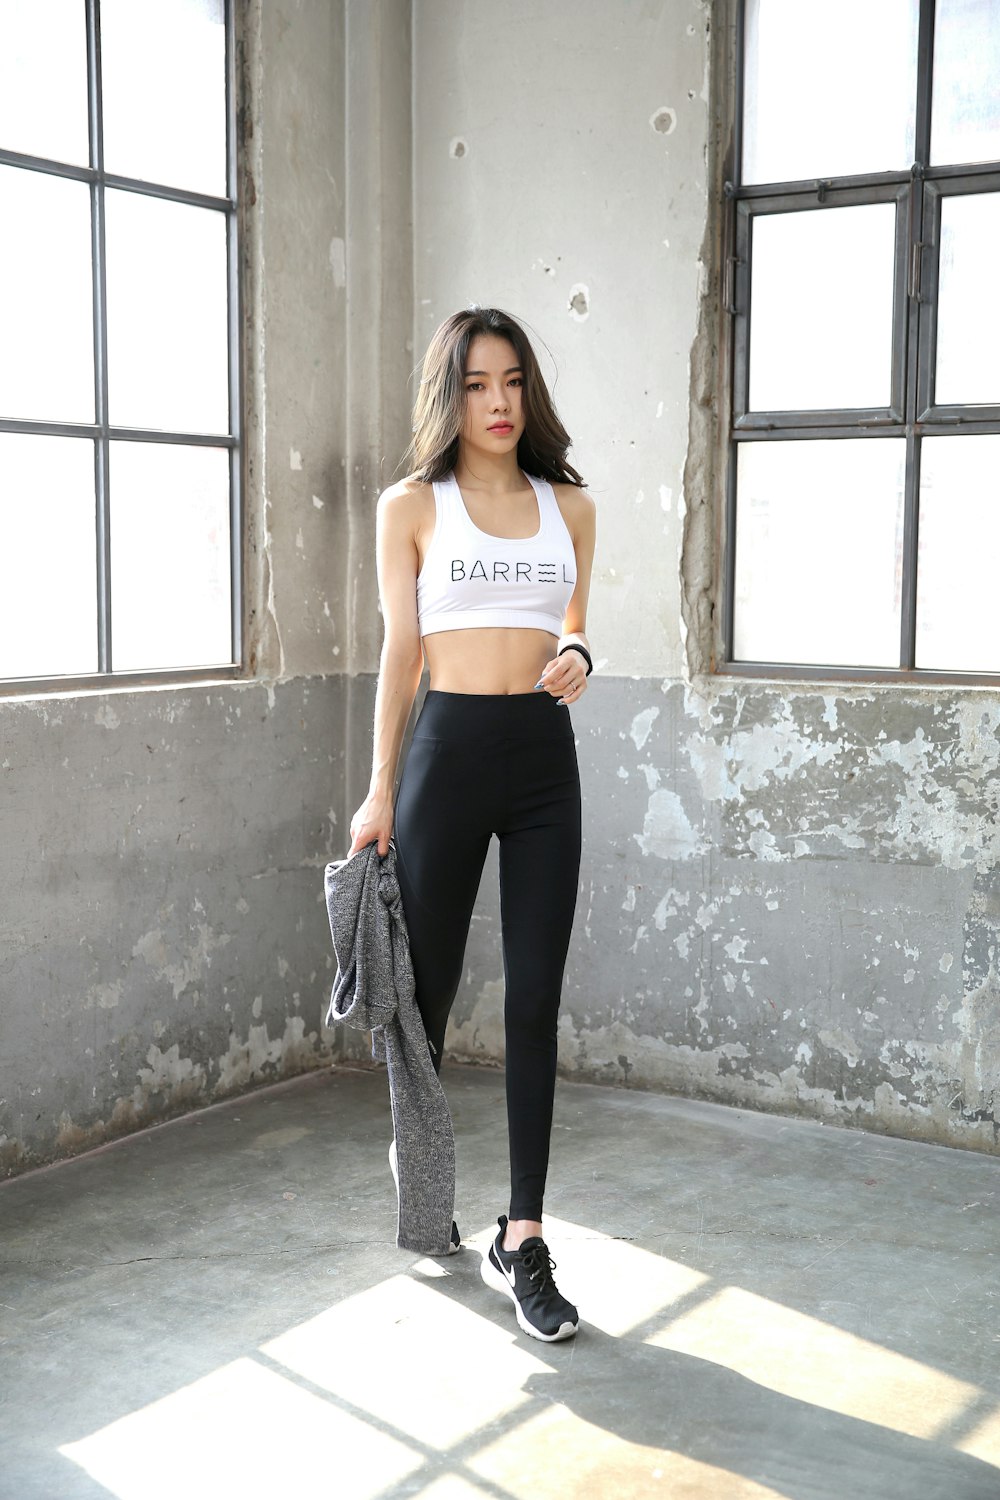 woman in white sports bra and black pants standing beside window during  daytime photo – Free Clothing Image on Unsplash